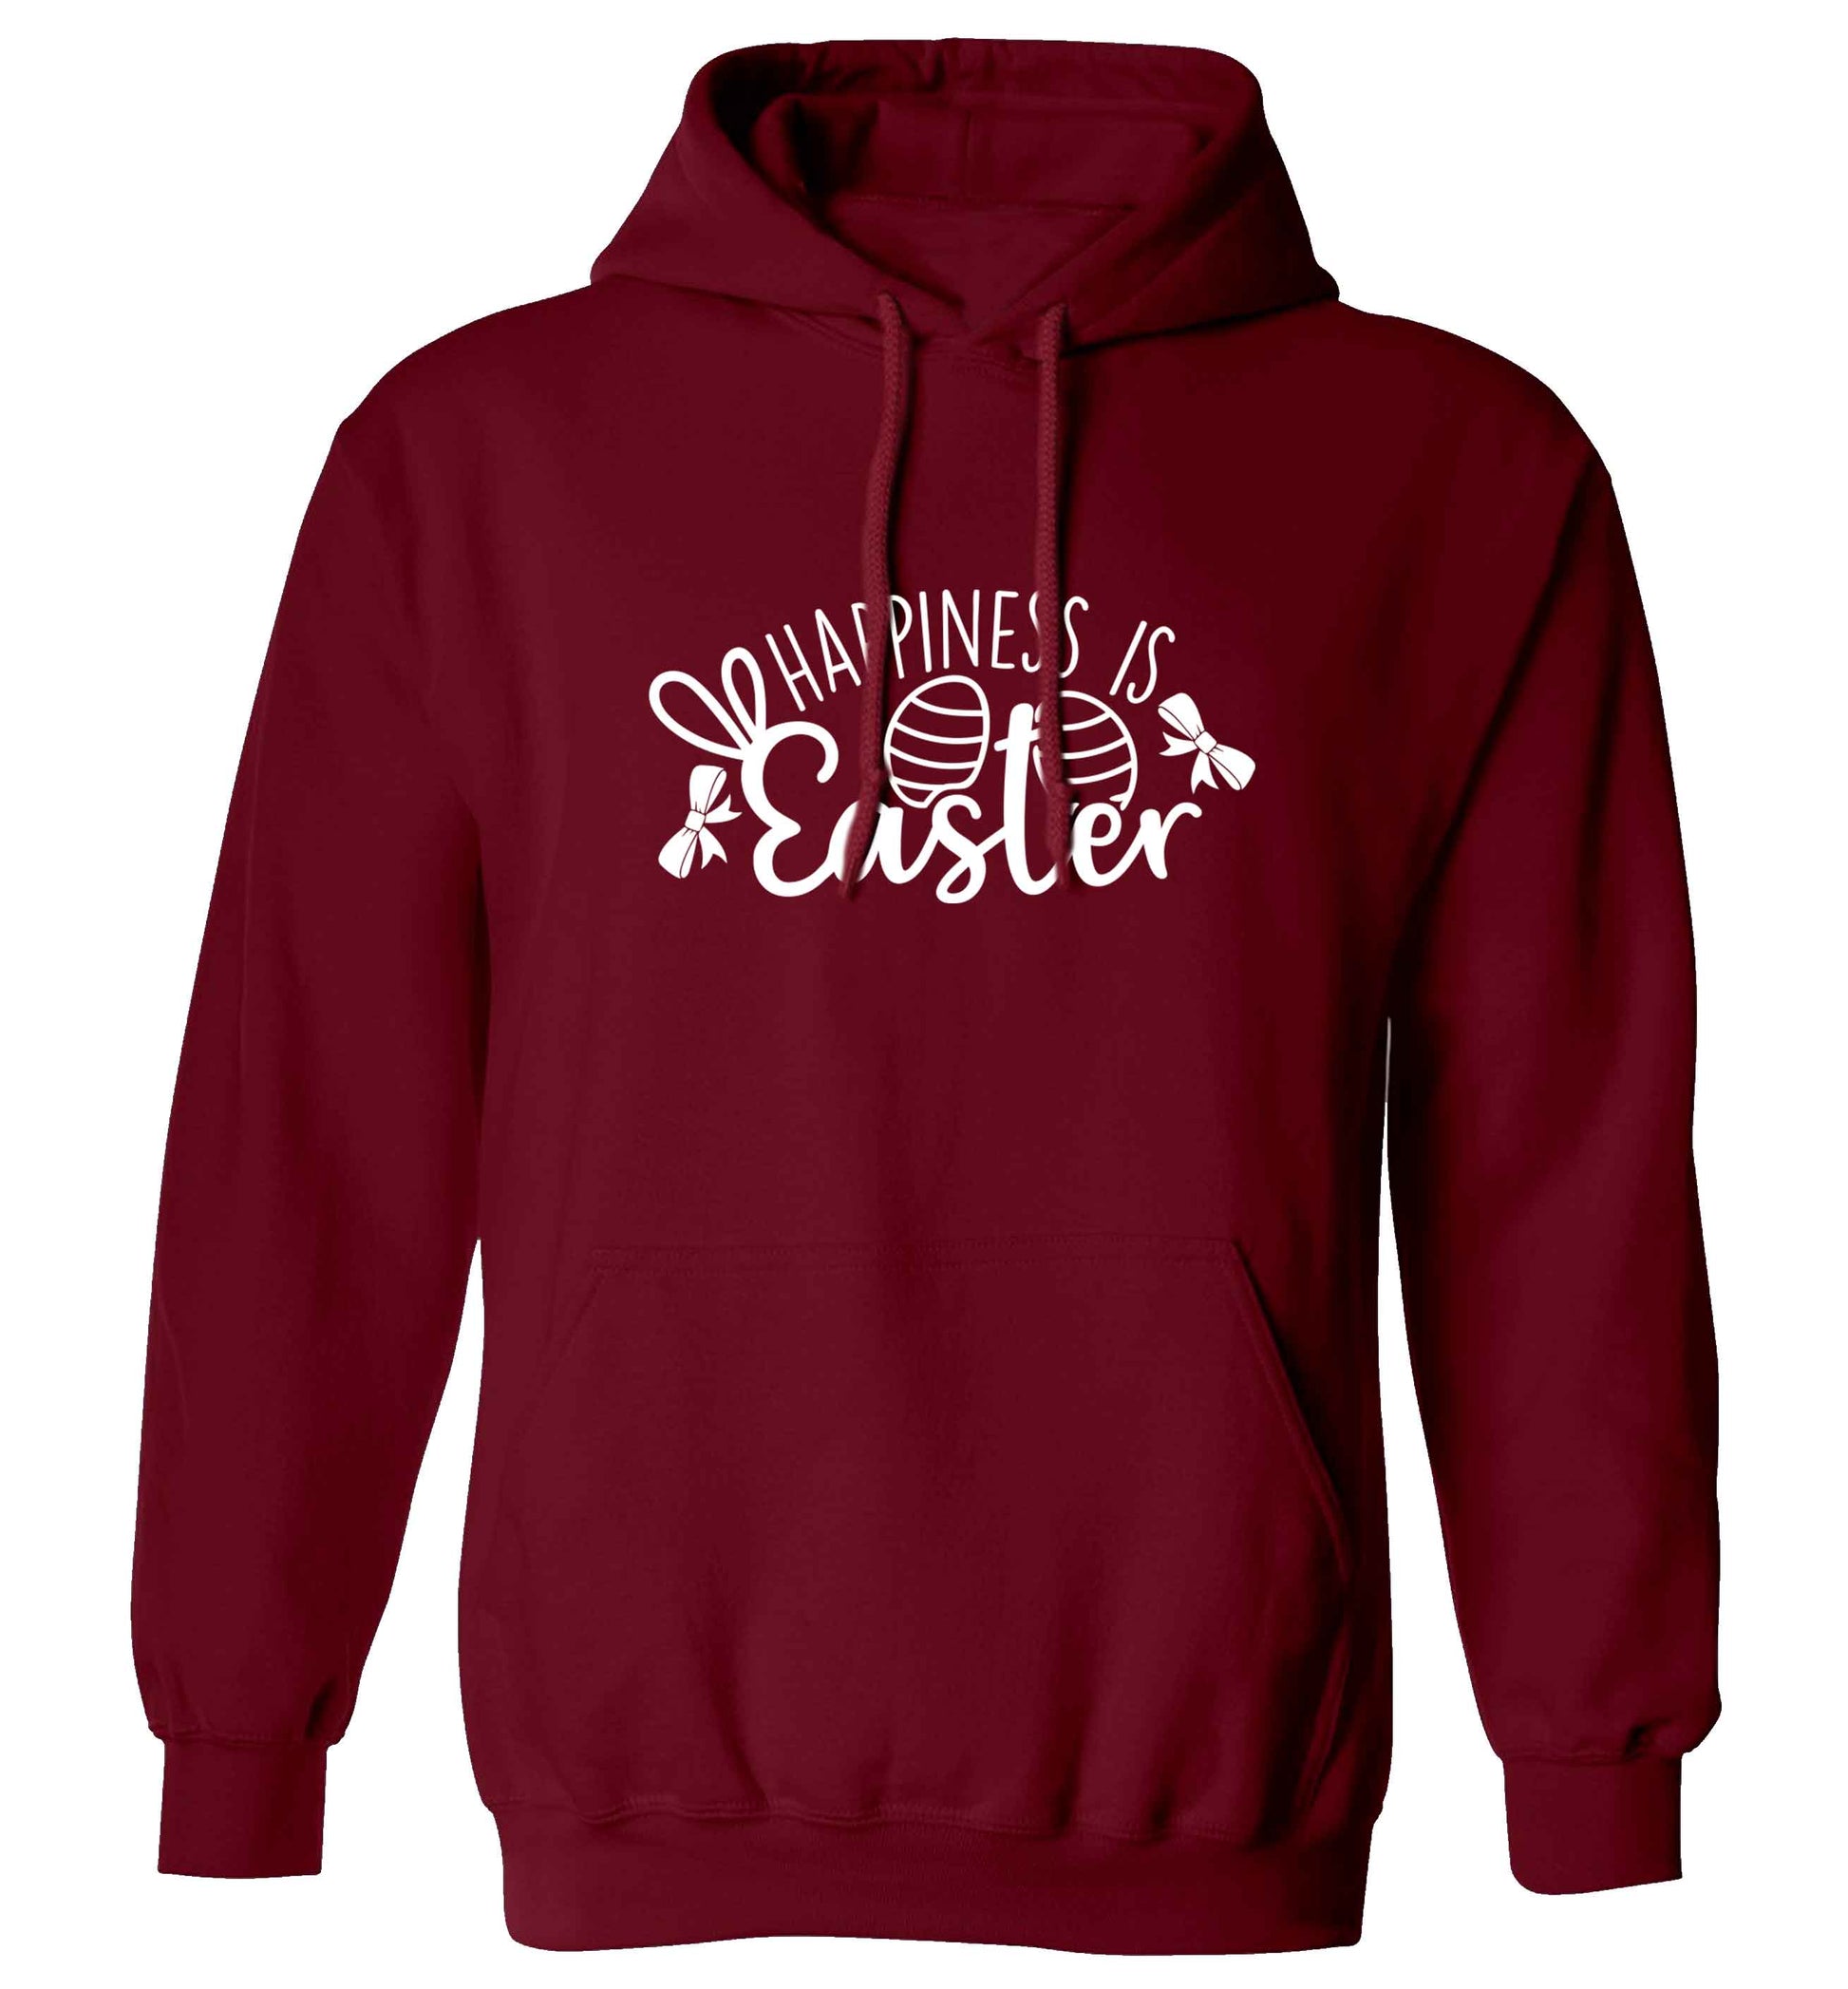 Happiness is easter adults unisex maroon hoodie 2XL